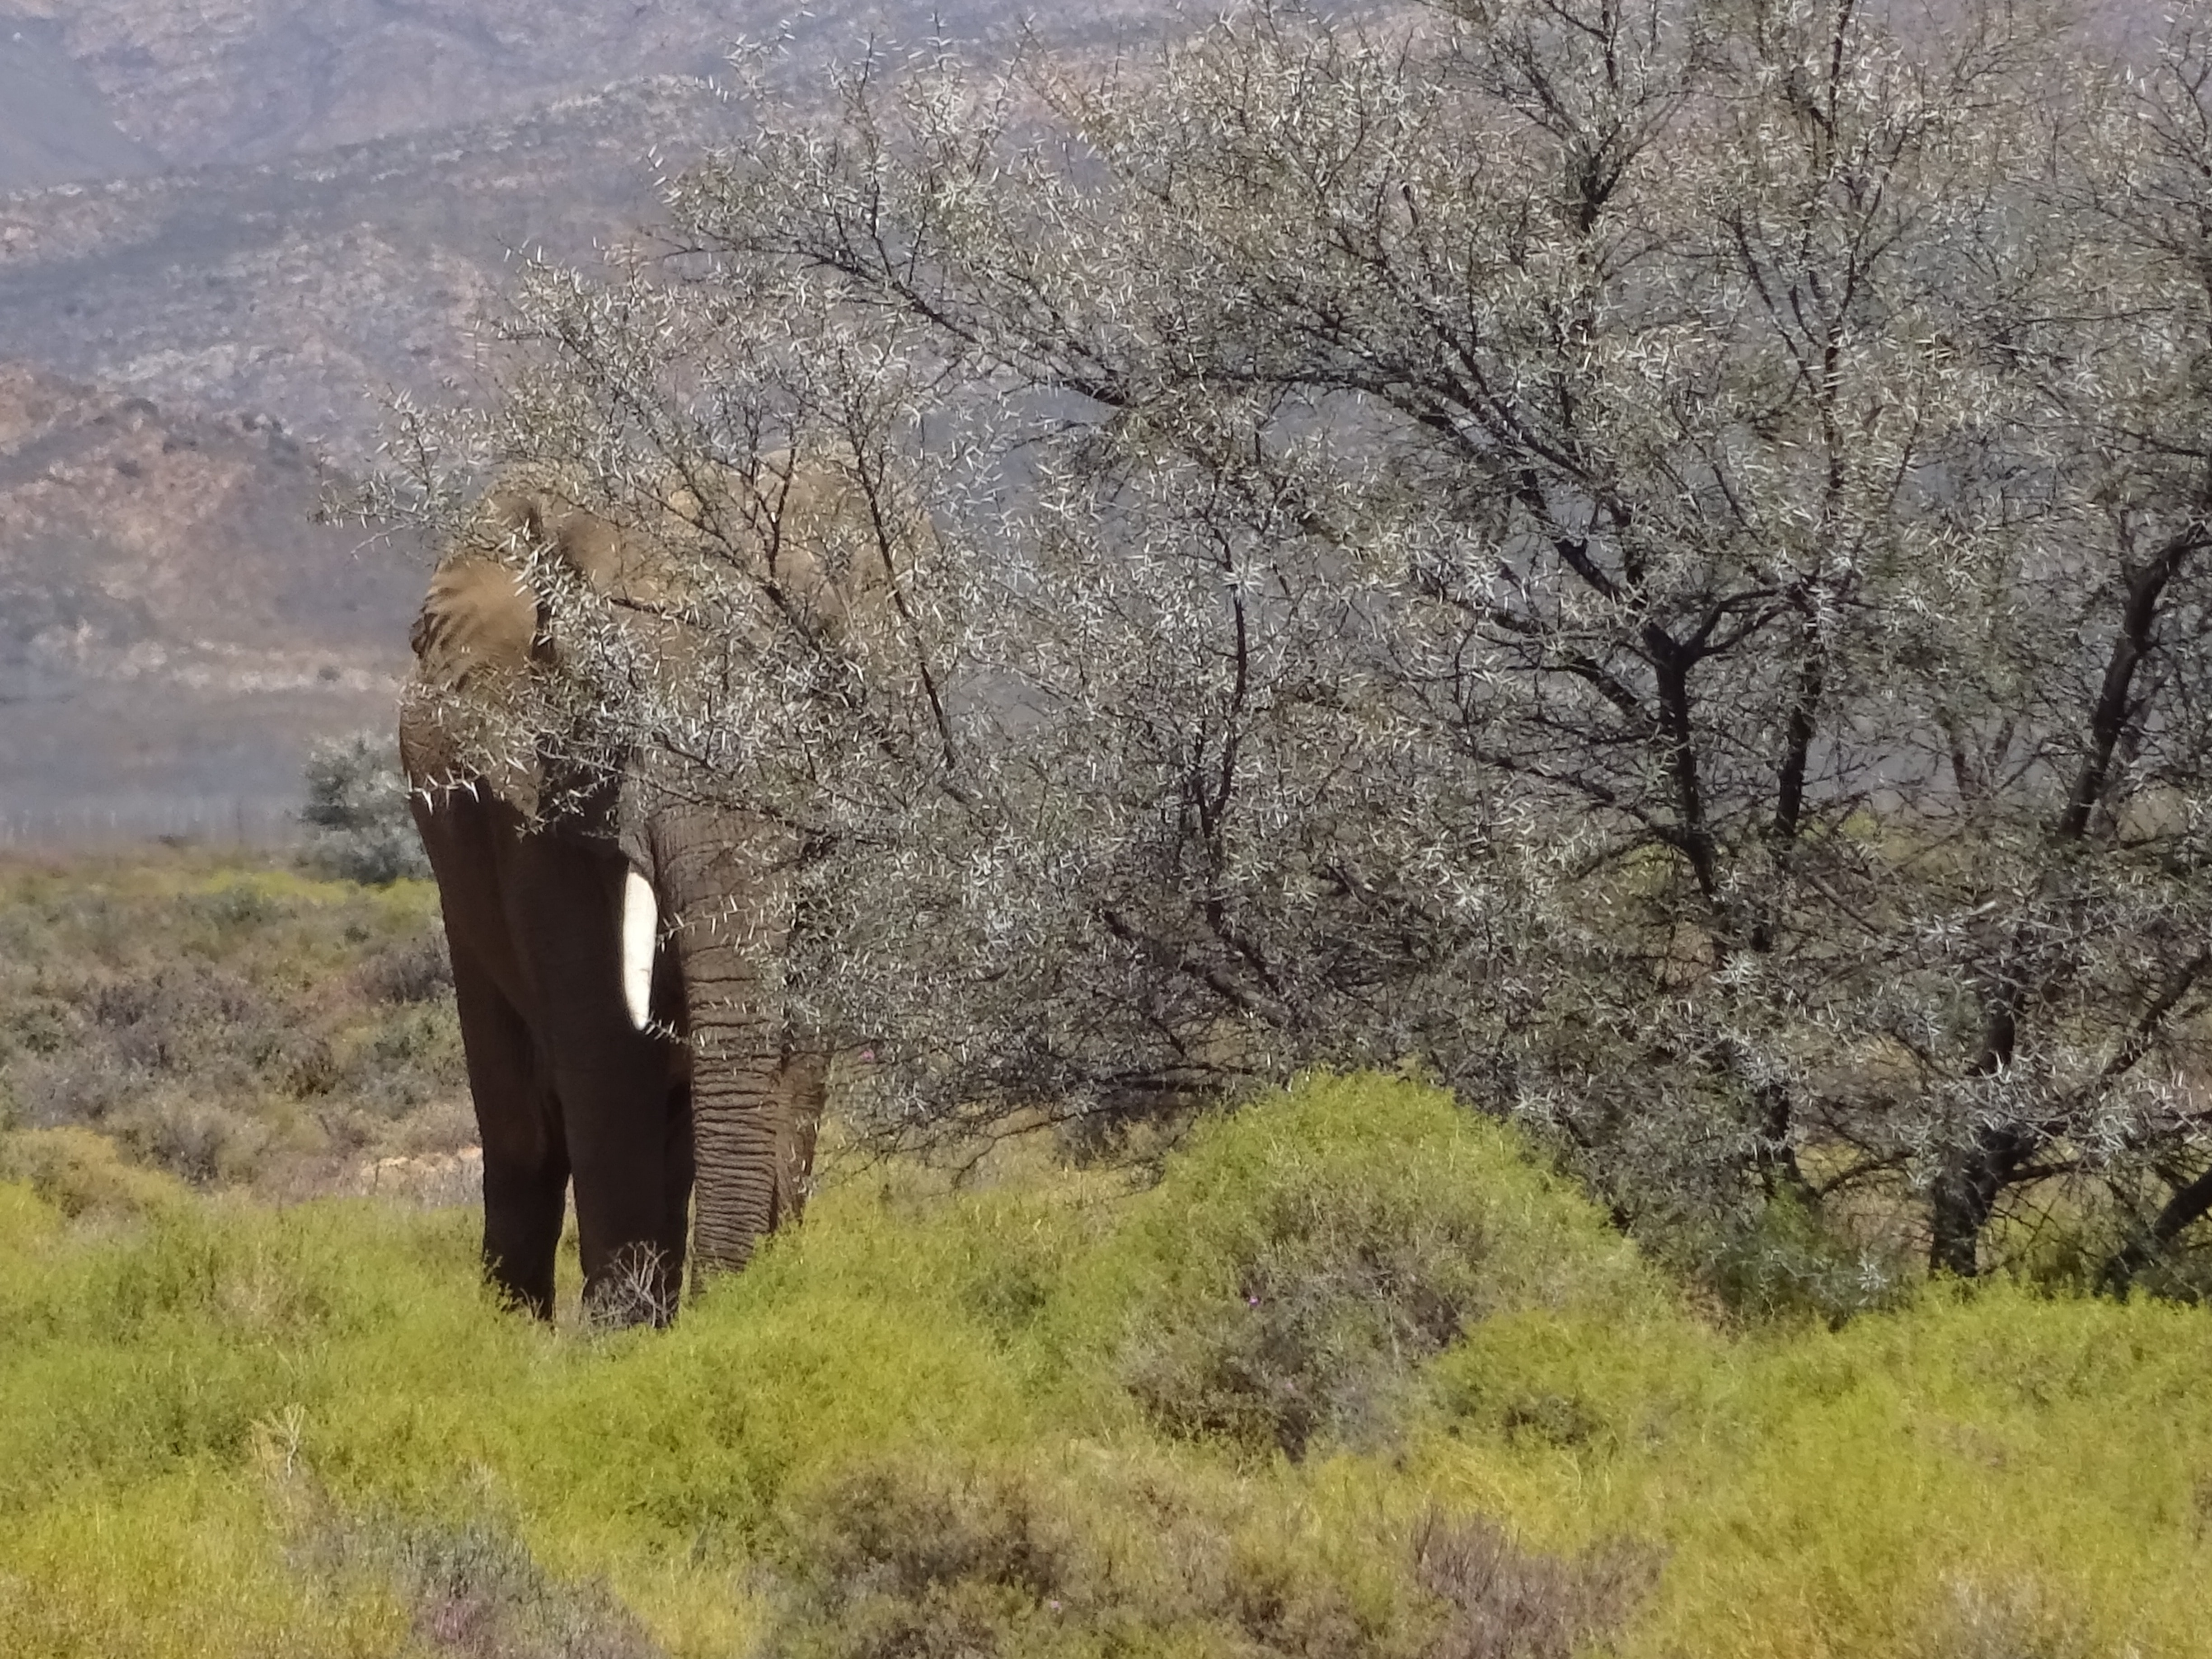 elephant beside a tree during daytime